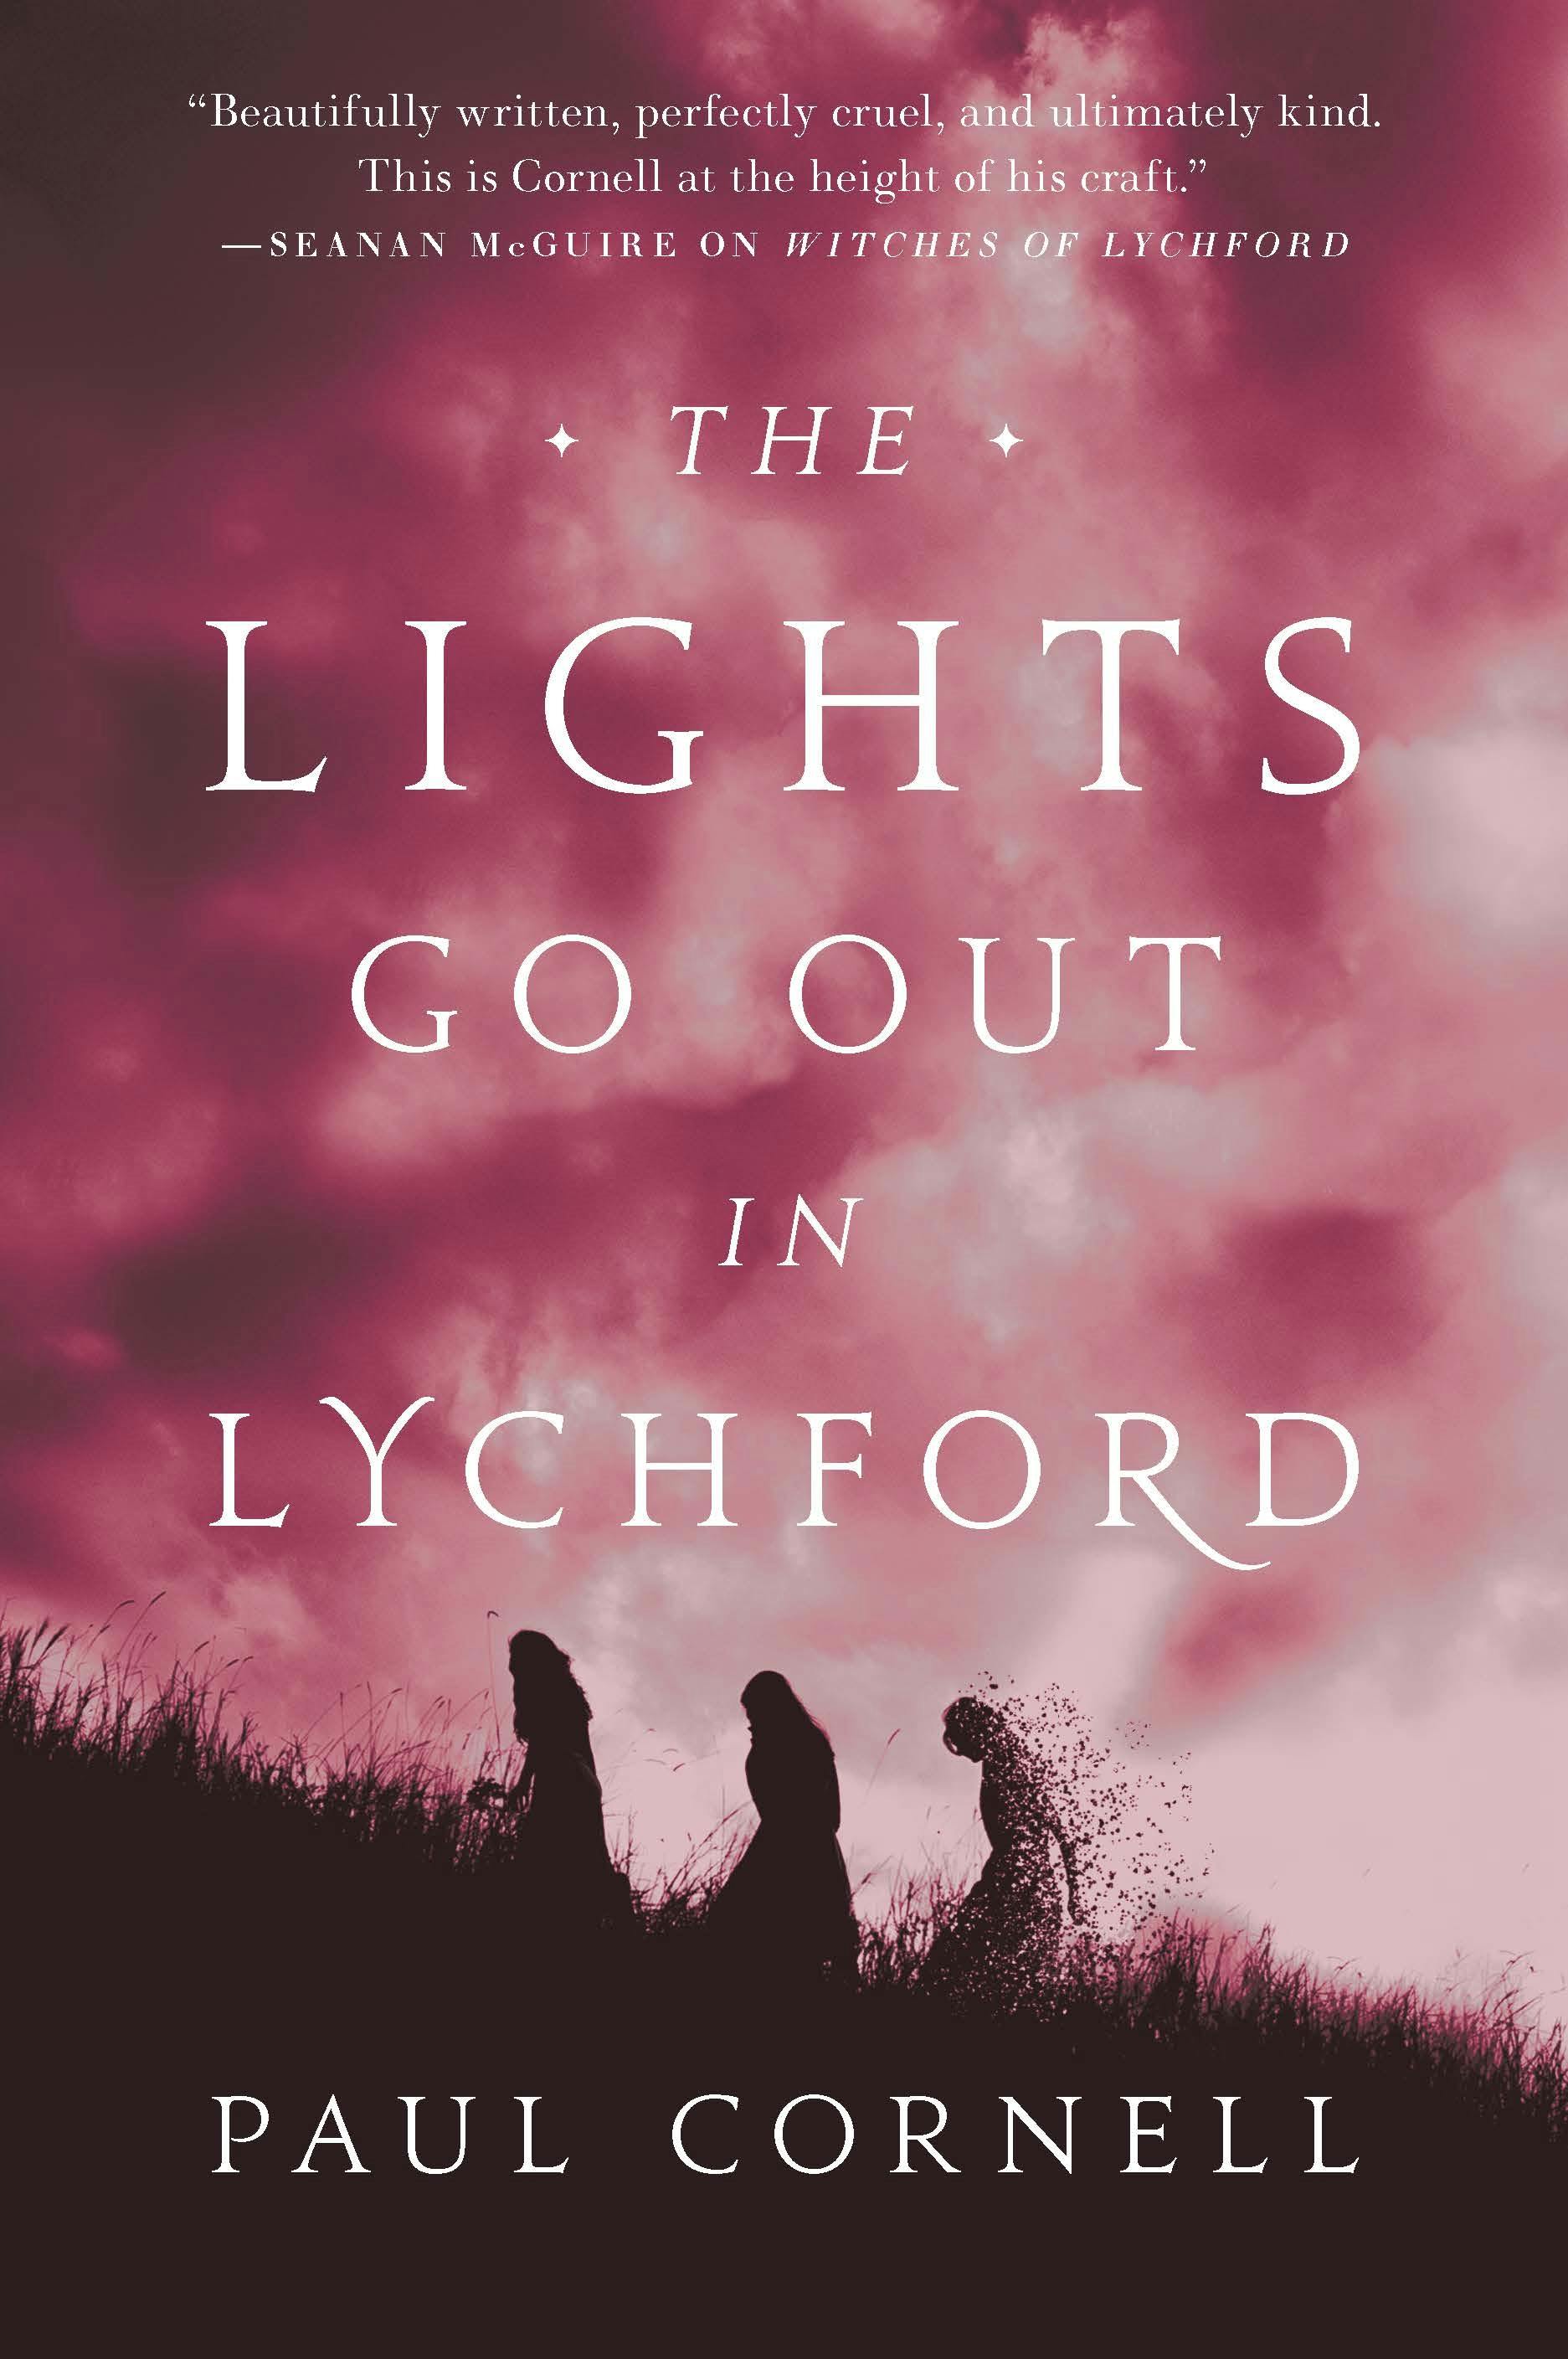 Cover for the book titled as: The Lights Go Out in Lychford